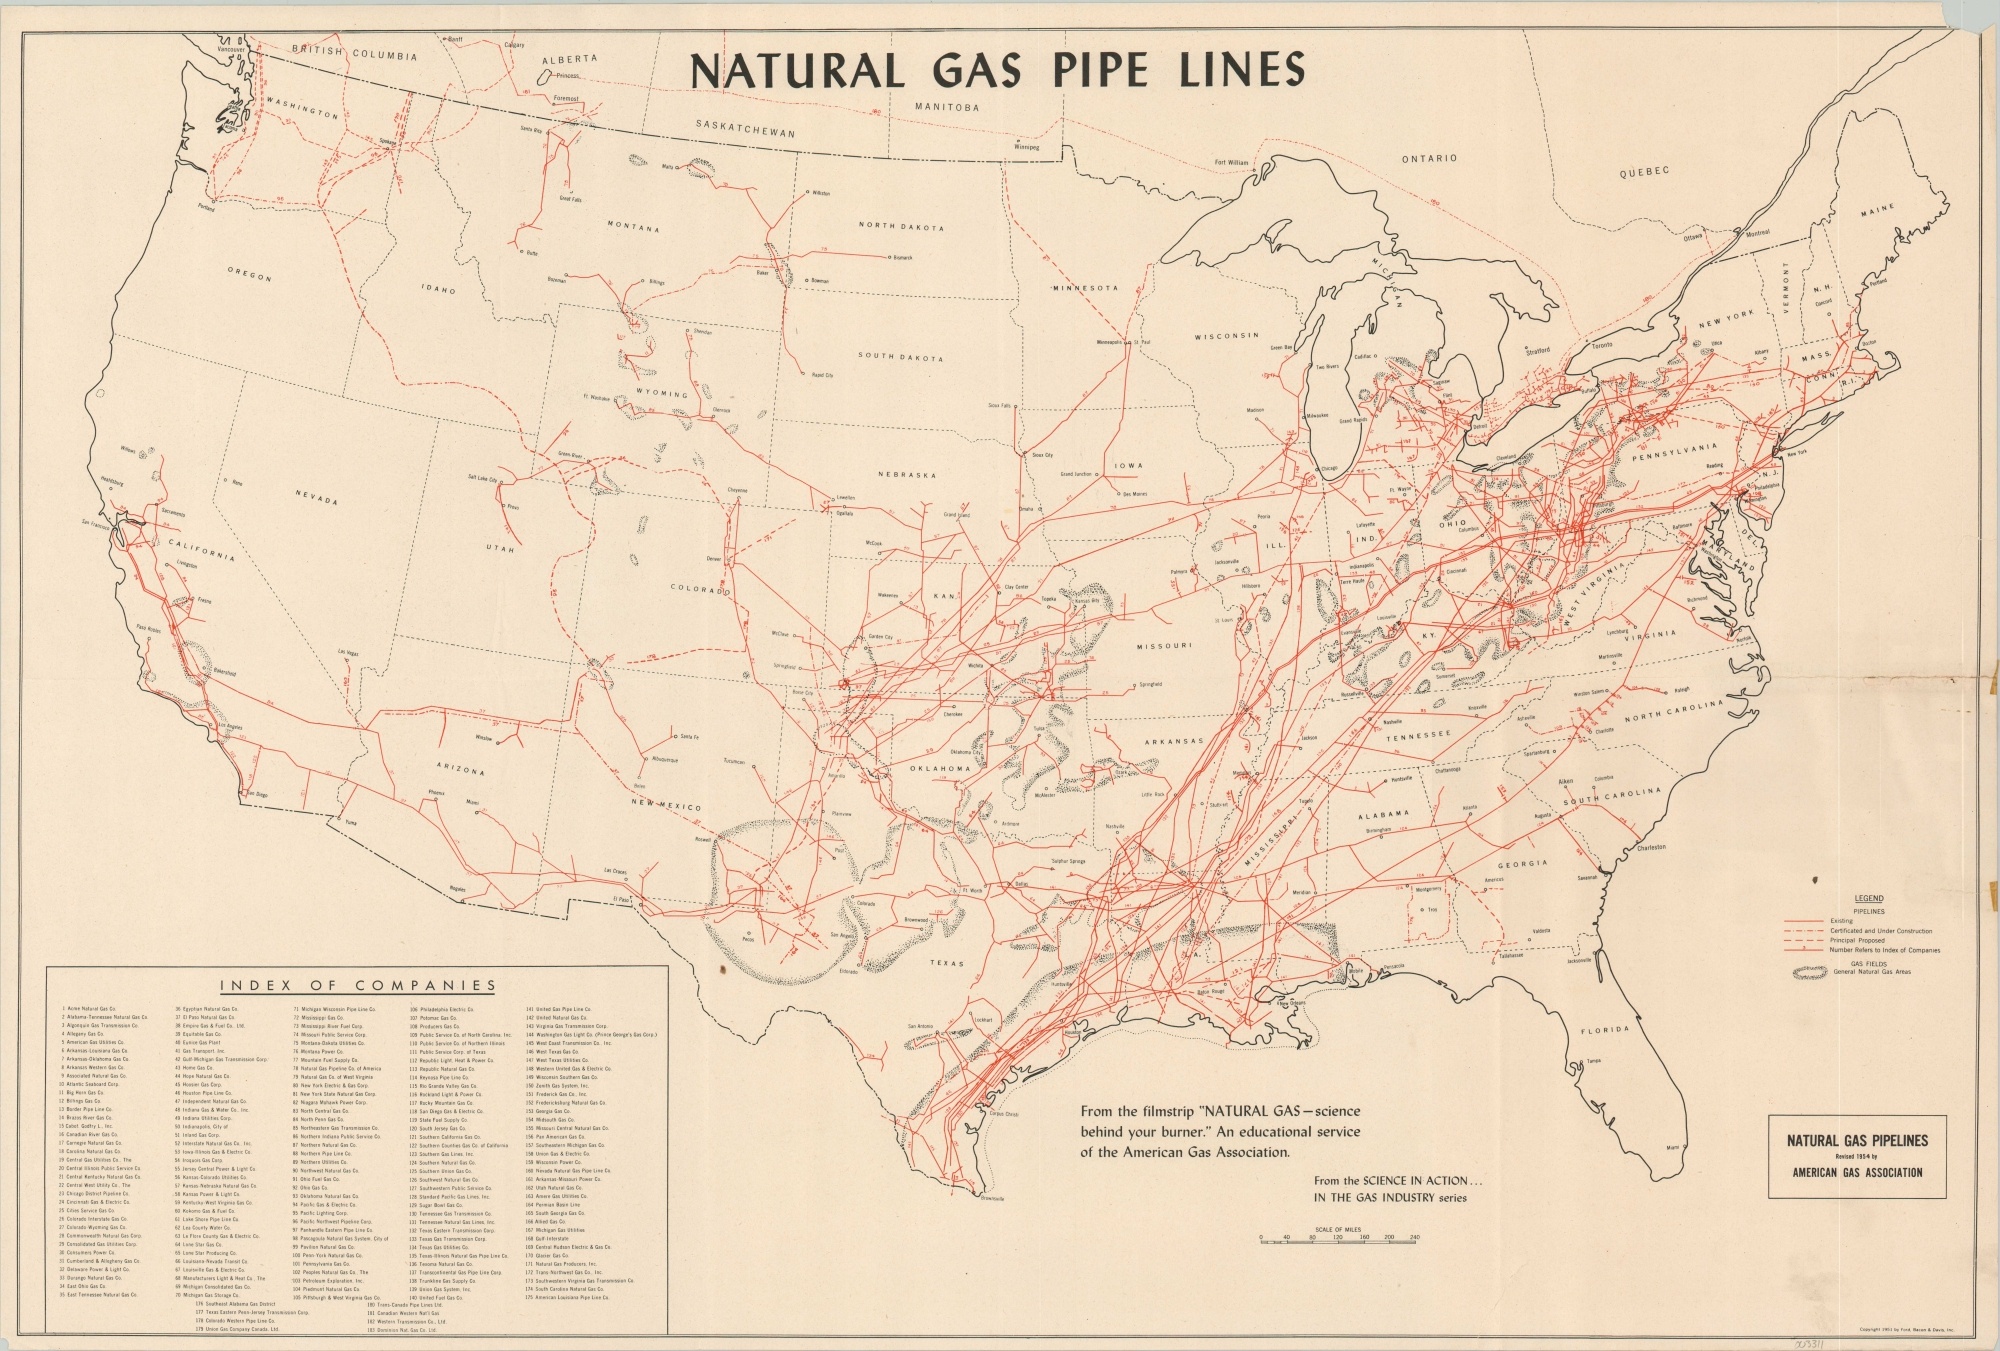 Natural Gas Pipe Lines – Curtis Wright Maps